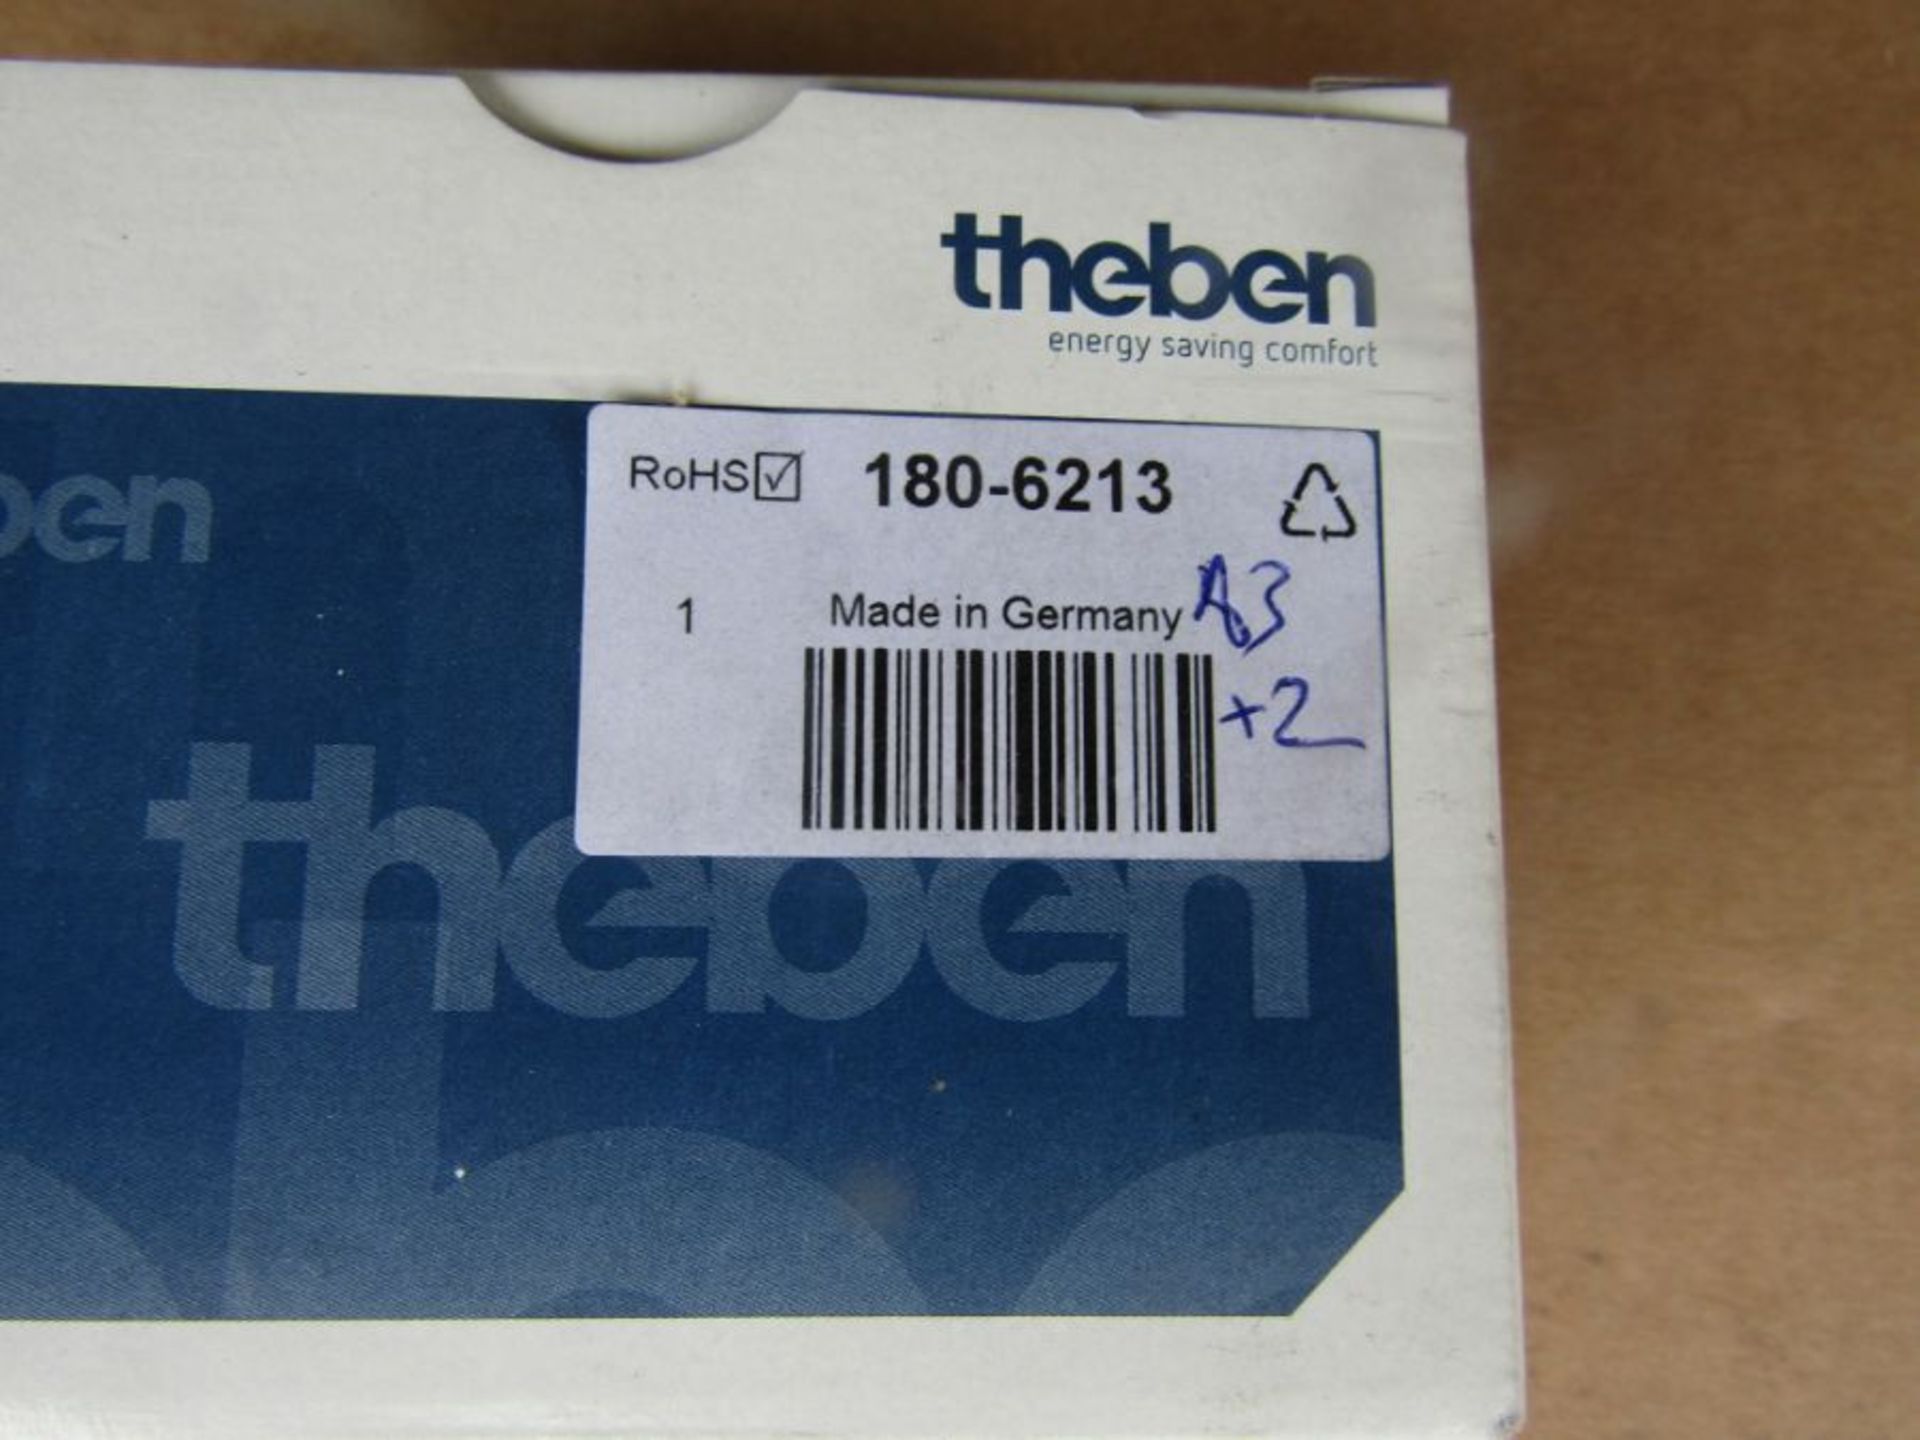 Theben Digital SELEKTA 171 RC TOP 3 DIN Rail Time Switch 110 230 V ac 1-Channel A3 1806213 - Image 6 of 6